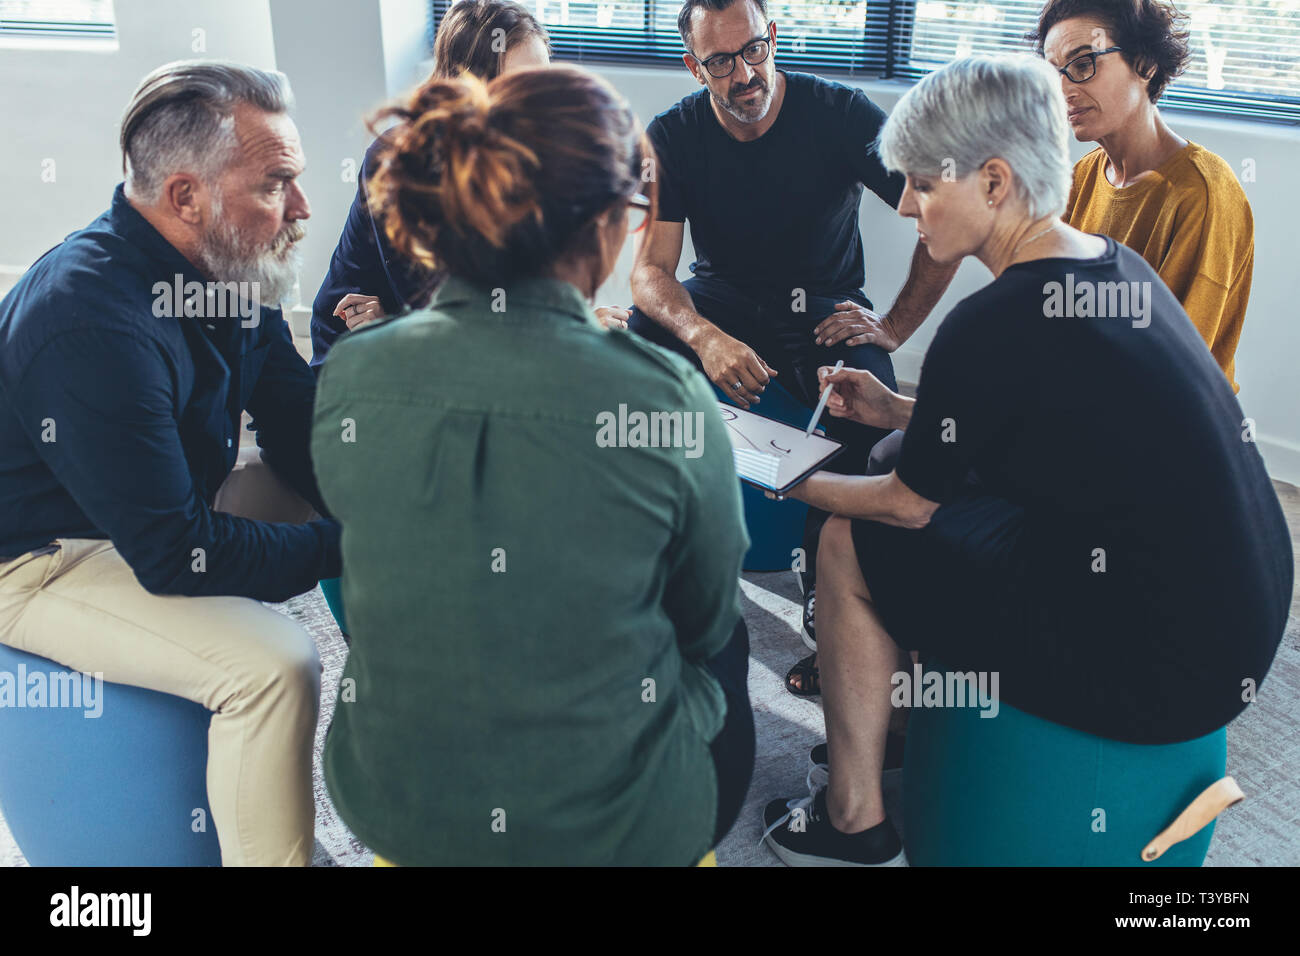 Multi-ethnic group of people sitting together having a meeting. business people having a group discussion on new working strategy. Stock Photo